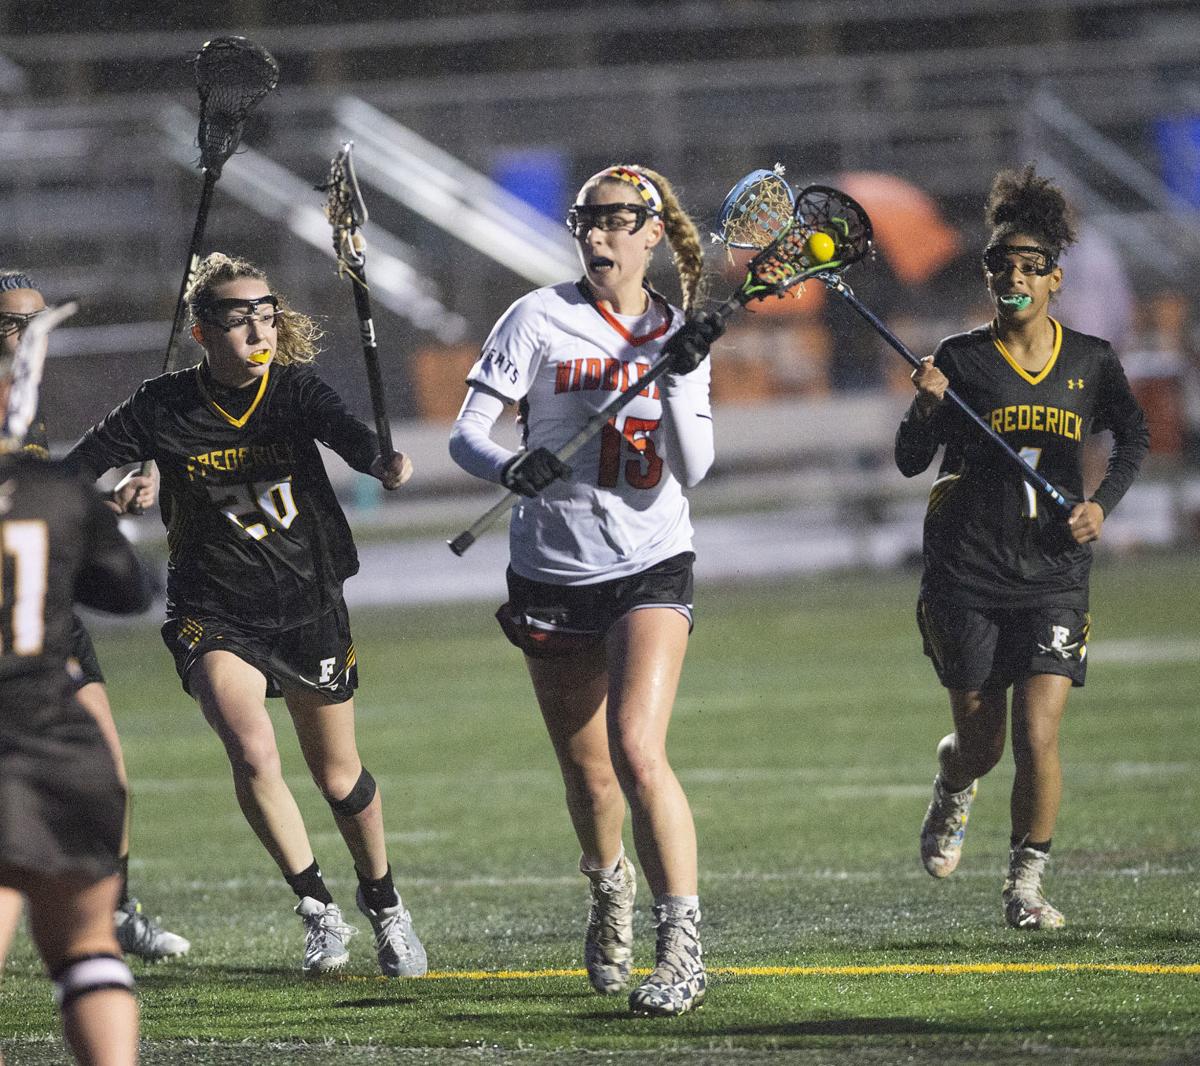 Middletown girls receive a push from Frederick in lacrosse | High ...